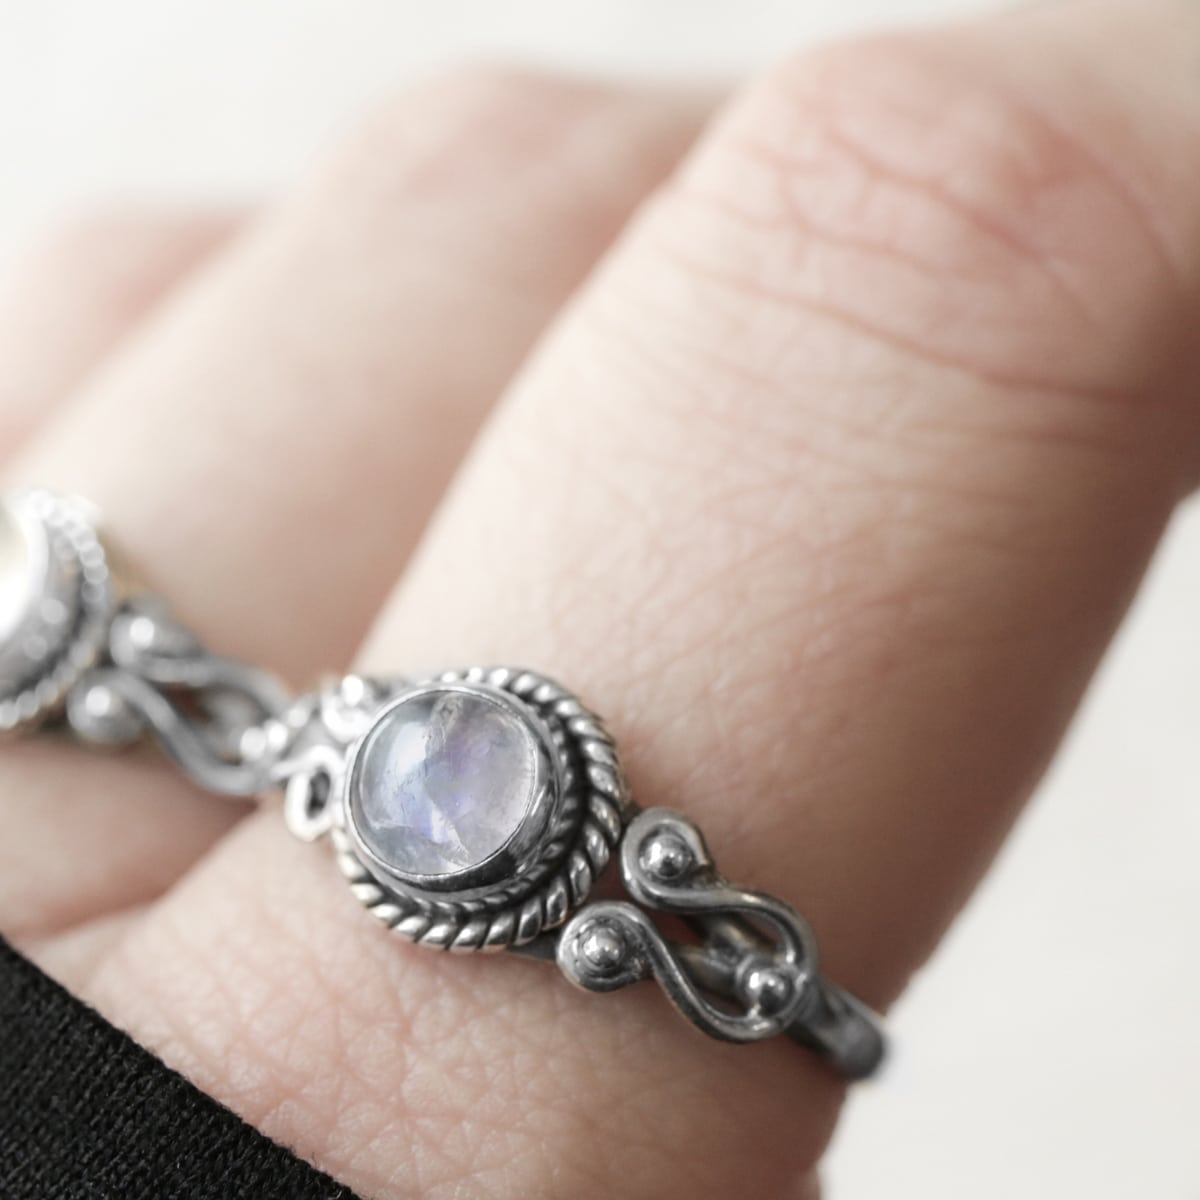 Q Details about   Solid Silver Whales Tail Ring Moonstone Sterling 925 Stamped Size J 